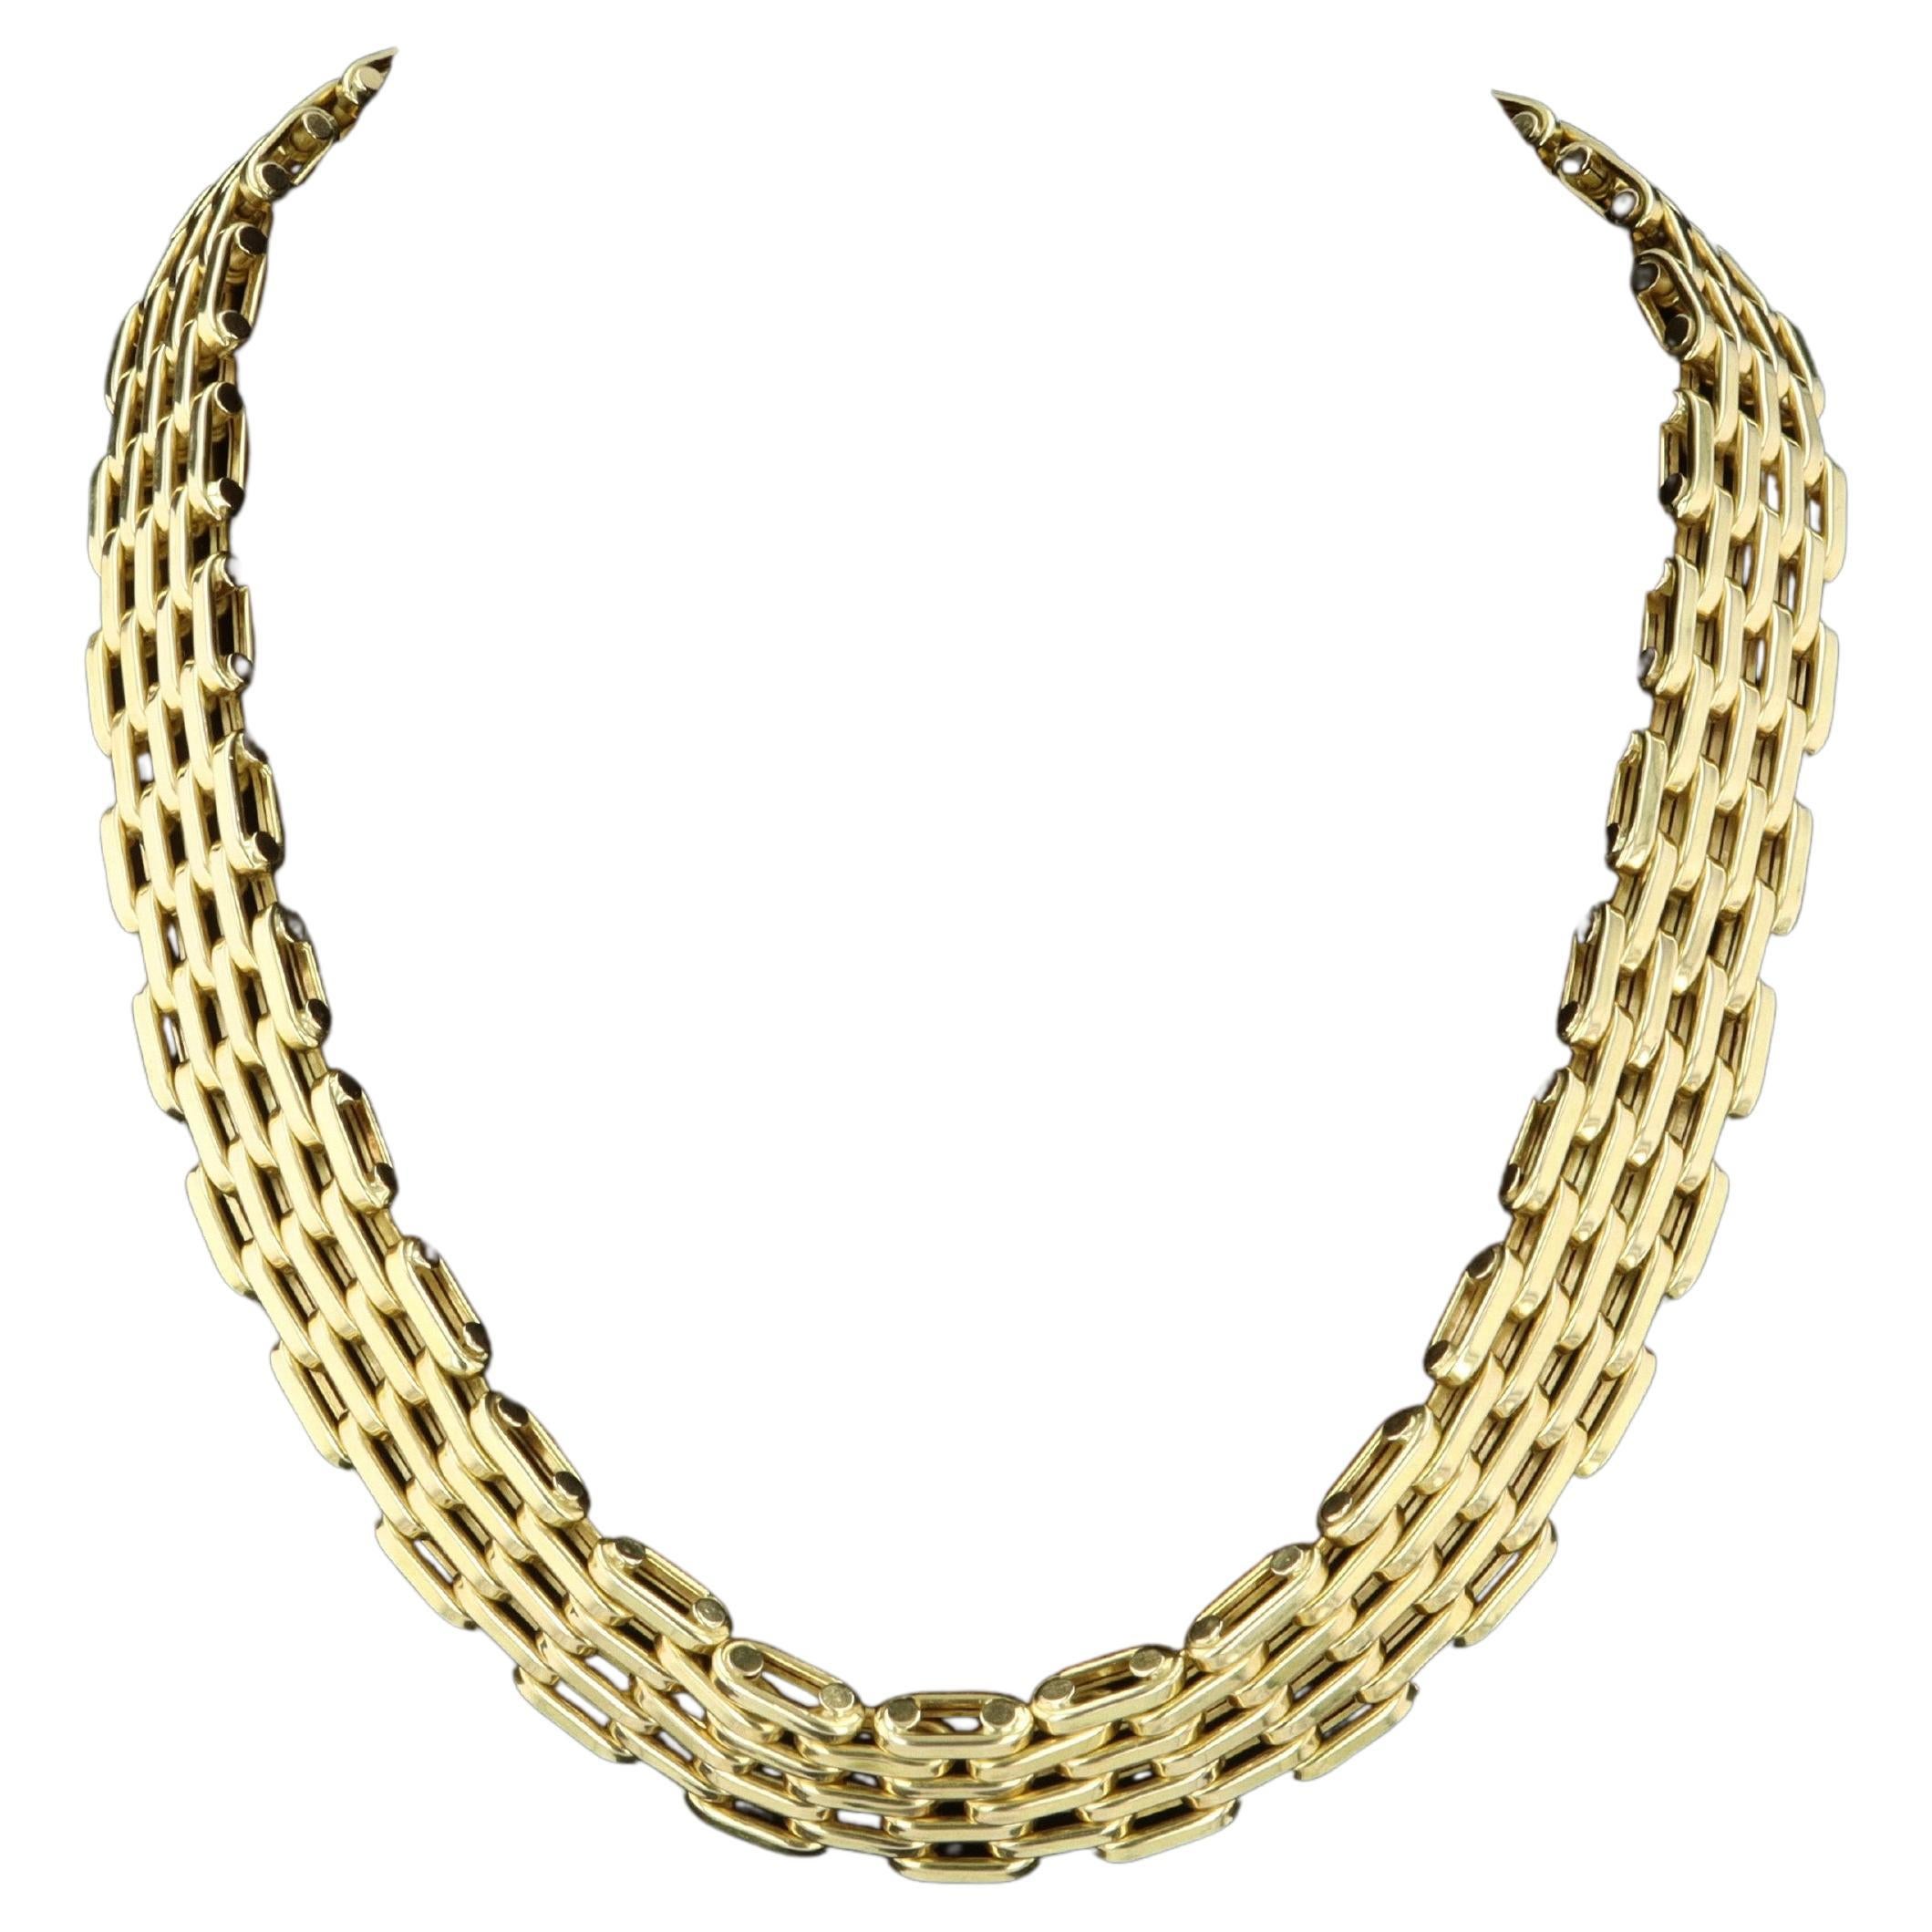 Links of Luxury Woven Gold Estate Necklace